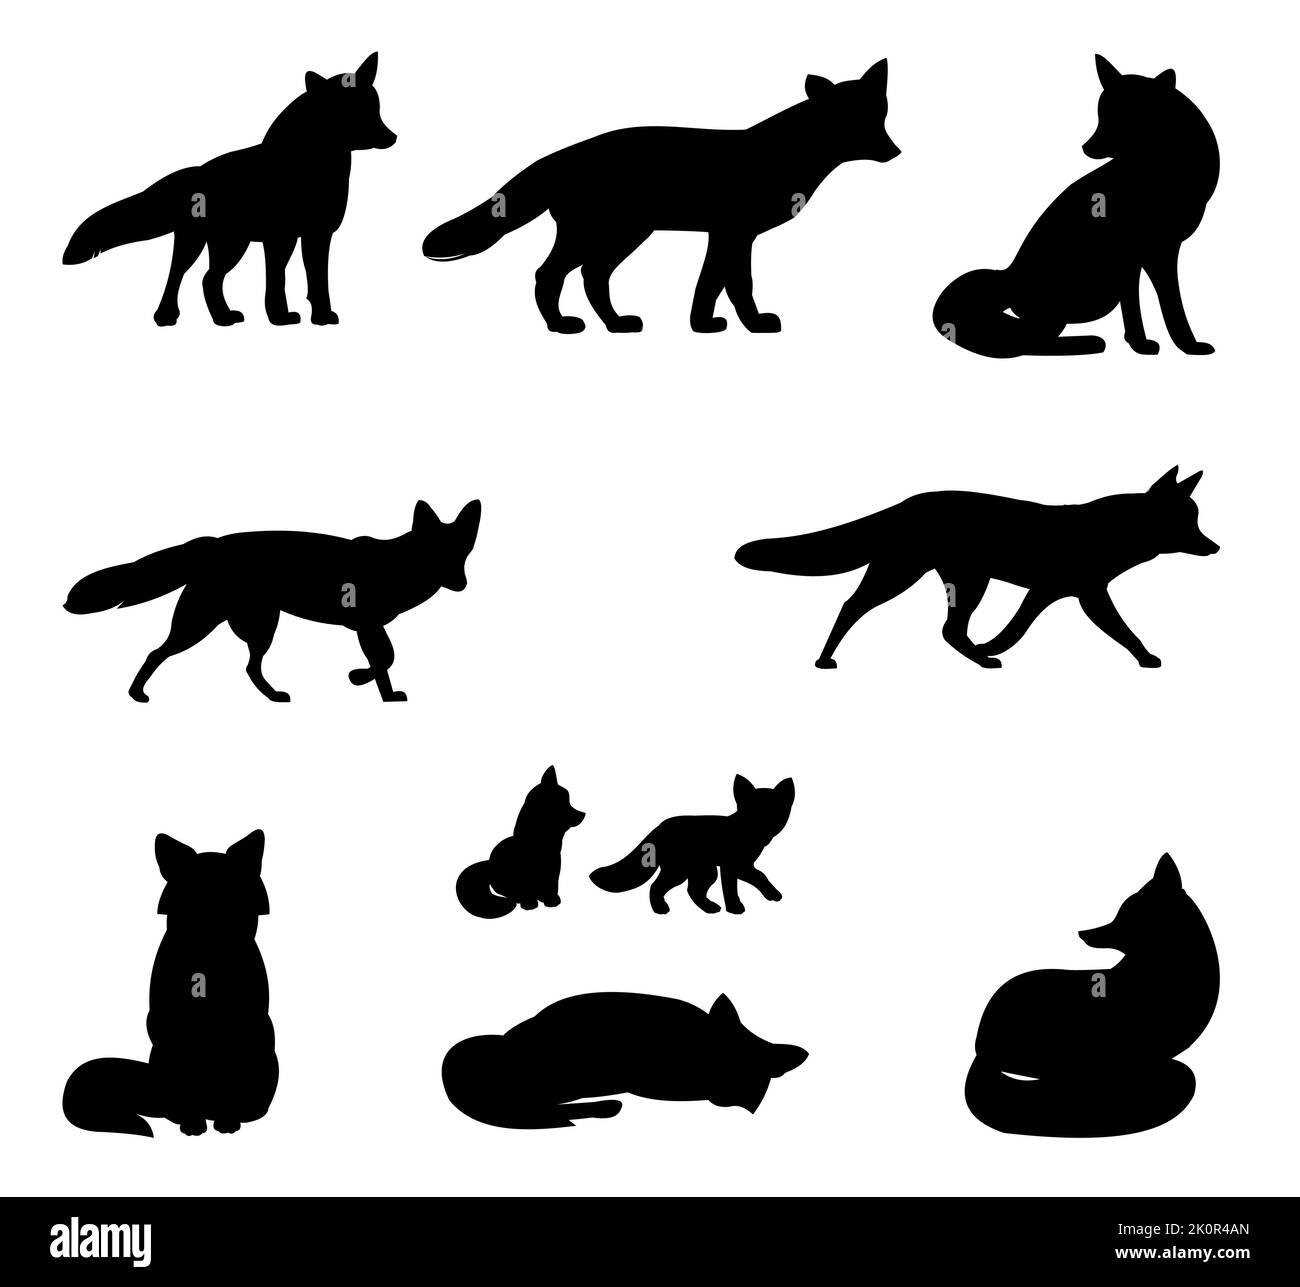 Fox set. Adults and foxes. Animal silhouette. Wild life picture. Isolated on white background. Vector. Stock Vector